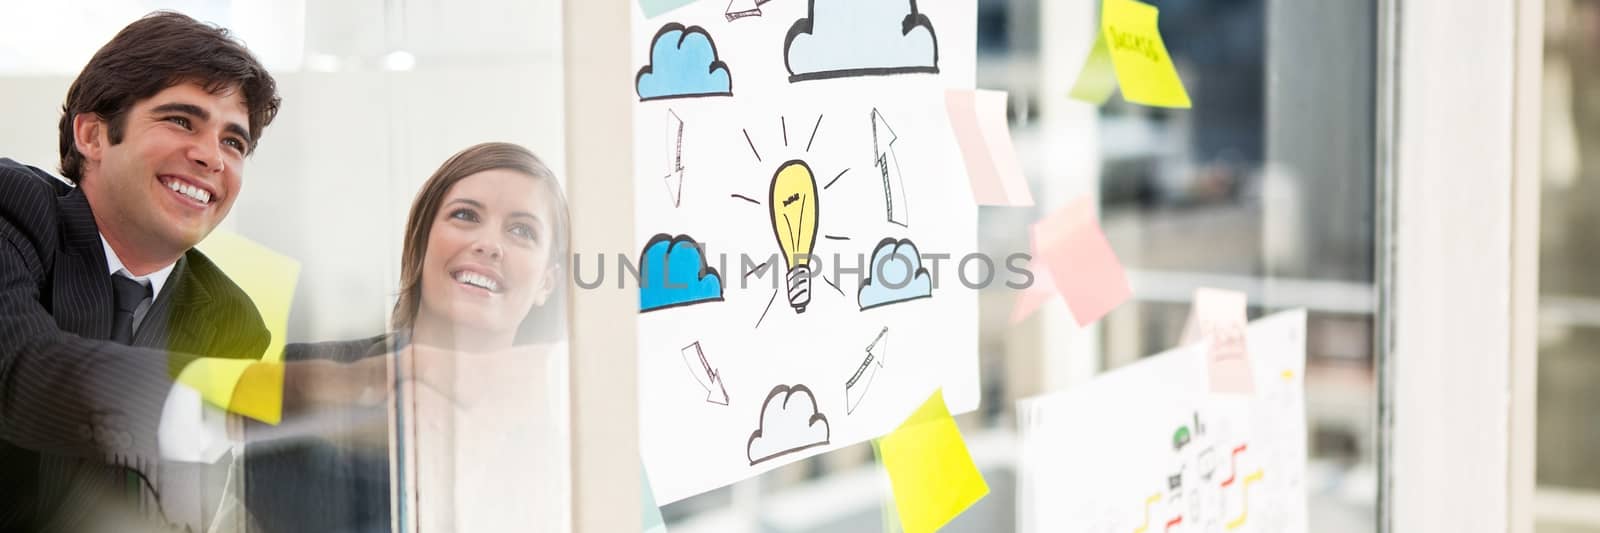 Digital composite of Business people smiling with window and sticky notes transition